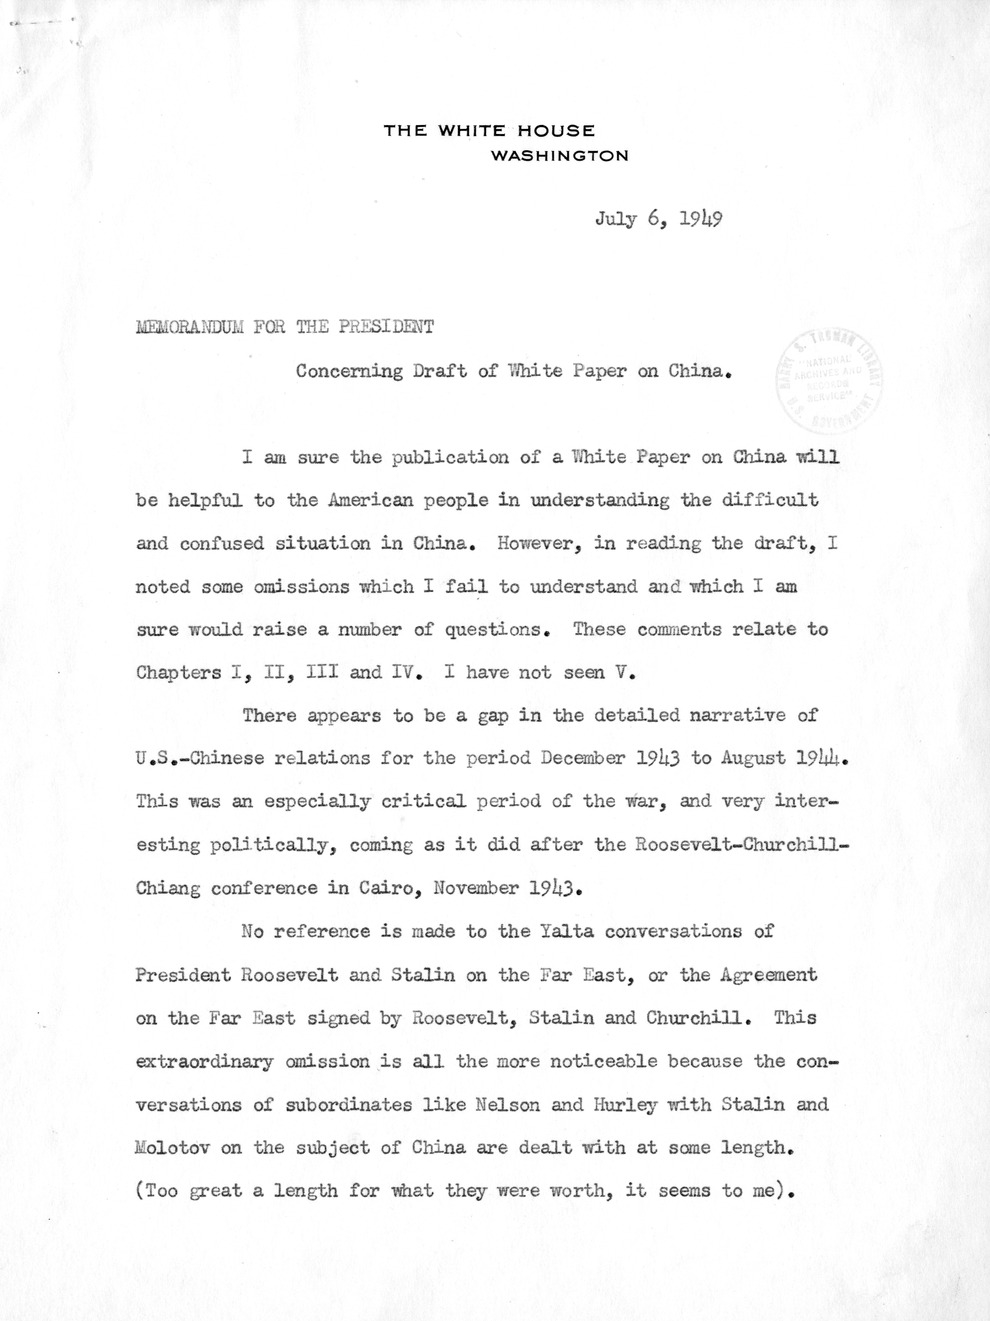 Memorandum from Secretary of State Dean Acheson to President Harry S. Truman, with Attached Memorandum from Clark Clifford